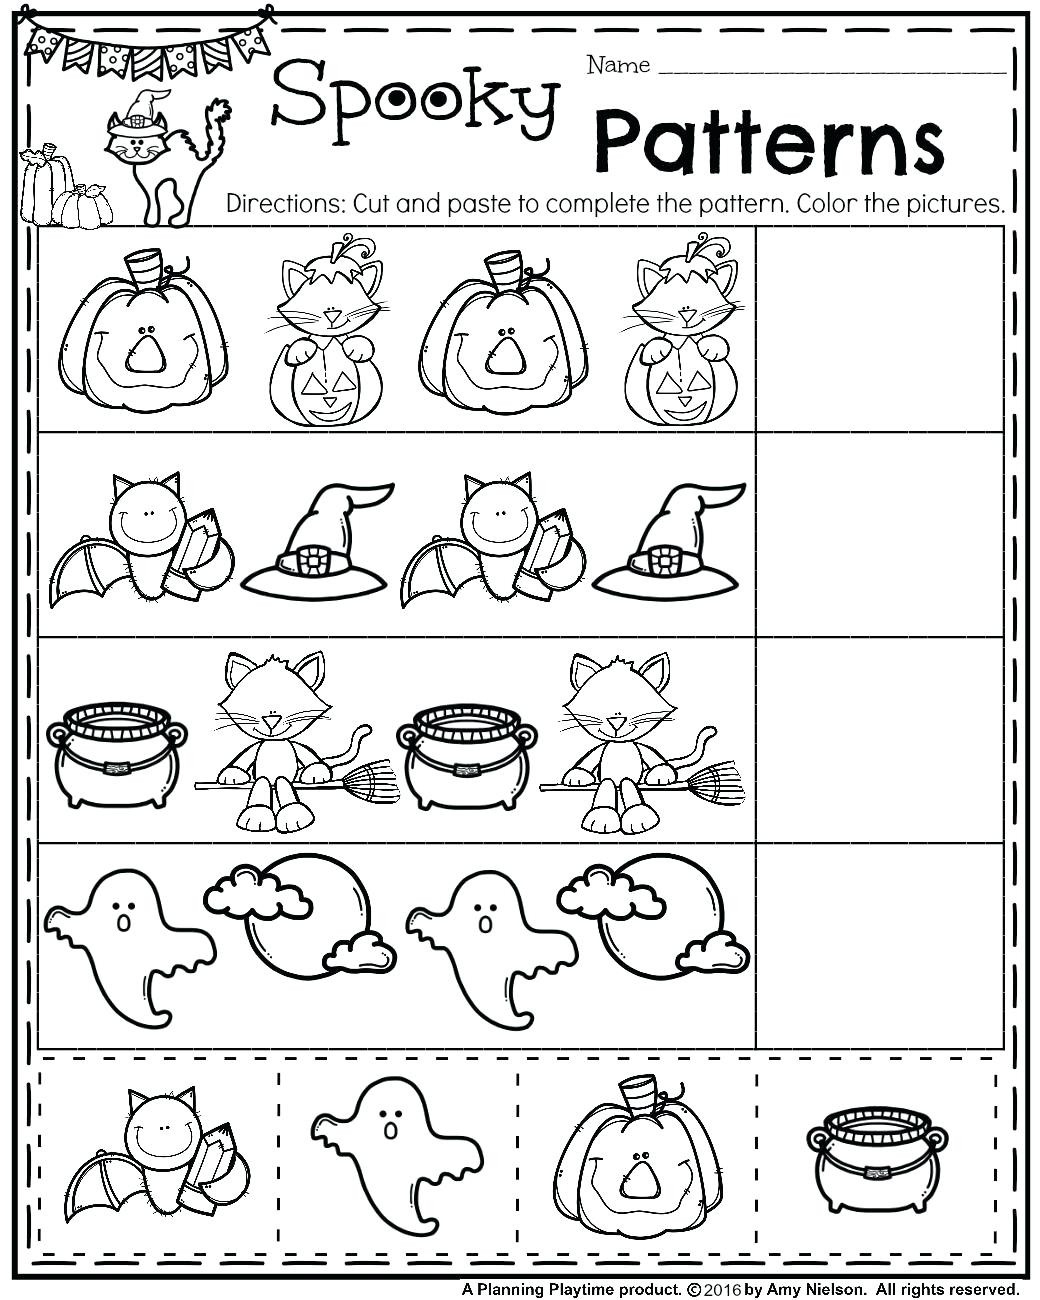 Free Abc Worksheets For Pre K Activity Shelter Pre K Worksheets Number Activity Shelter